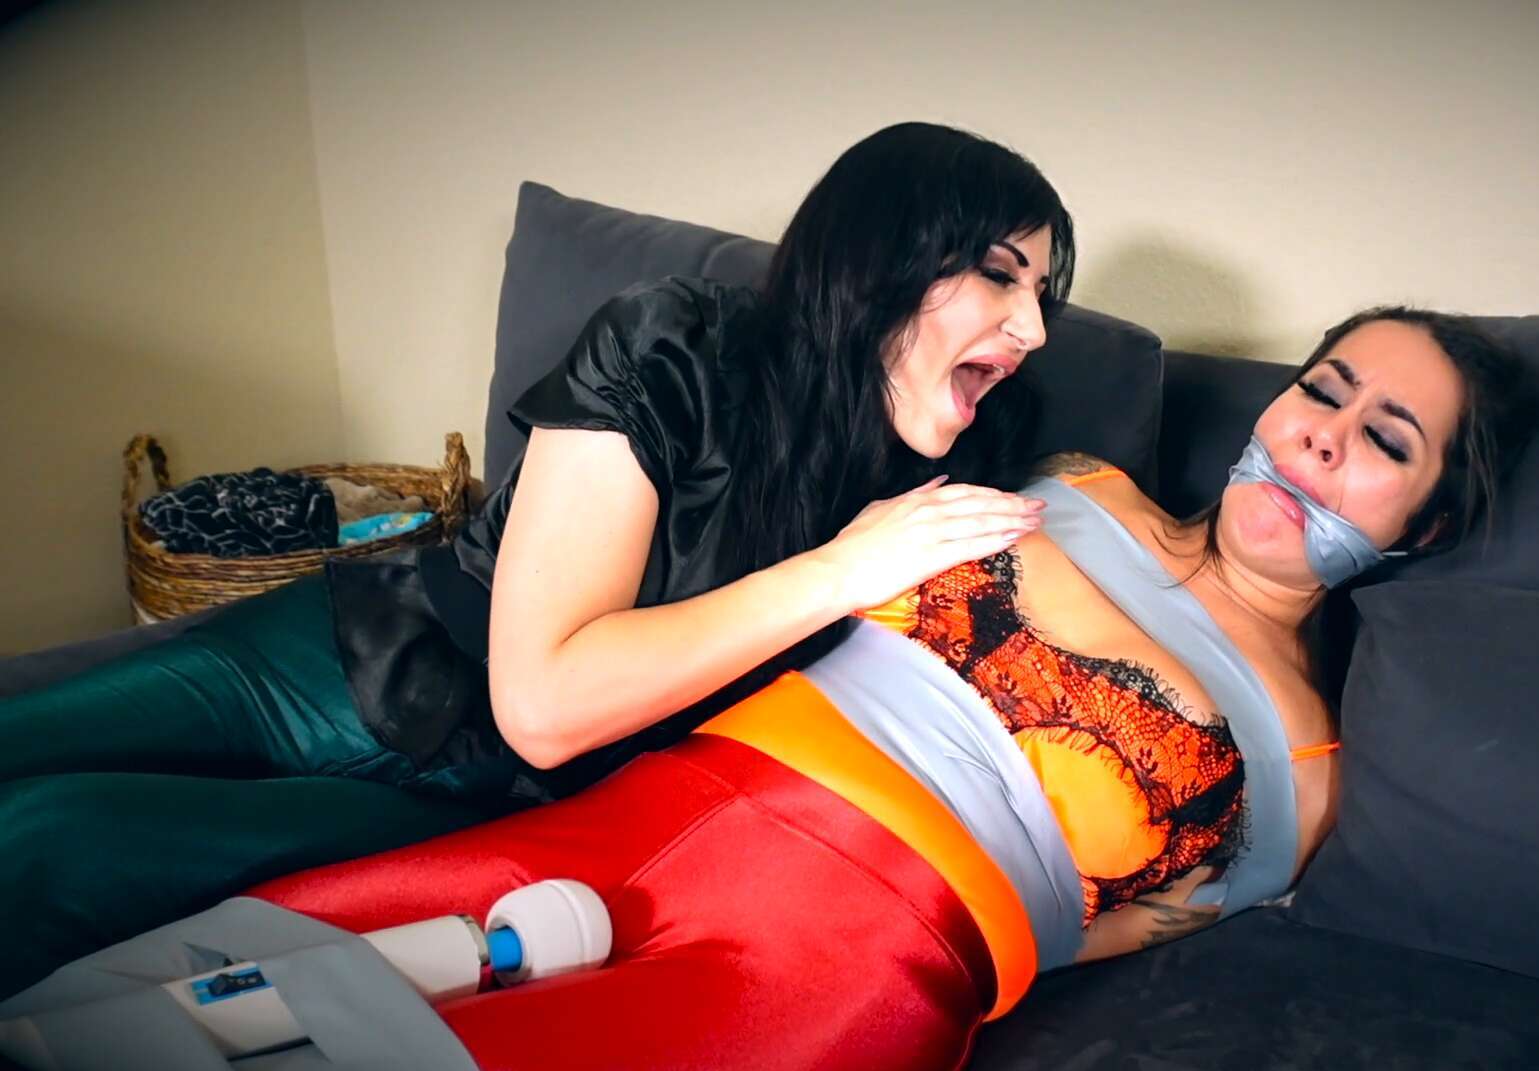 Lesbian Bondage - Misty Meaner... Taped & Teased By Pervy Burglar - Tight duct tape cleave gag into Misty’s mouth